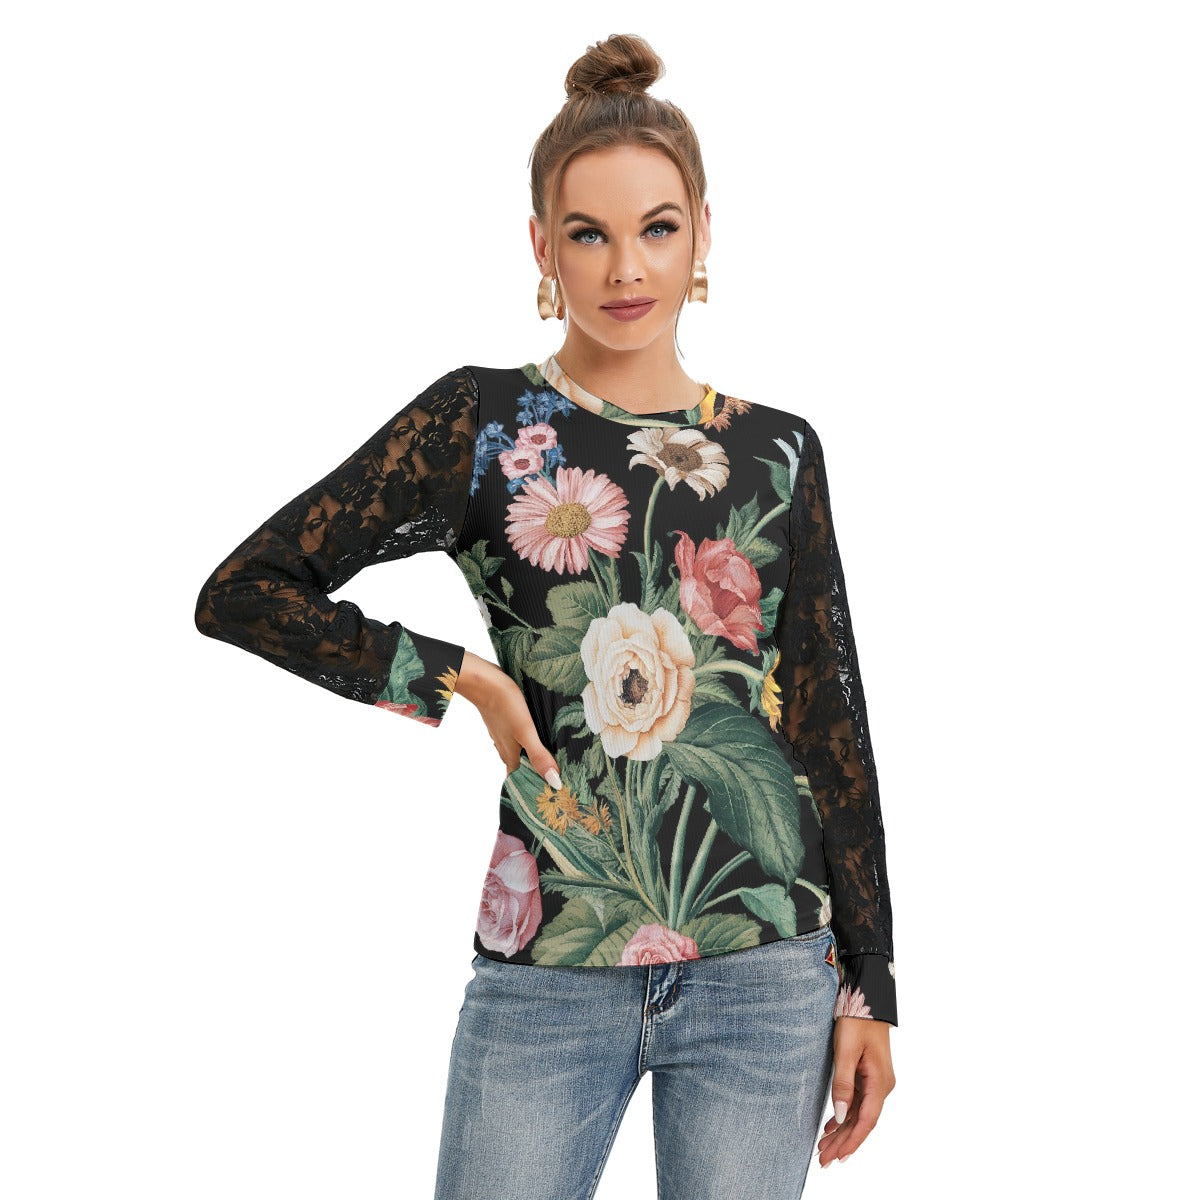 All-Over Print Women's T-shirt And Sleeve With Black Lace